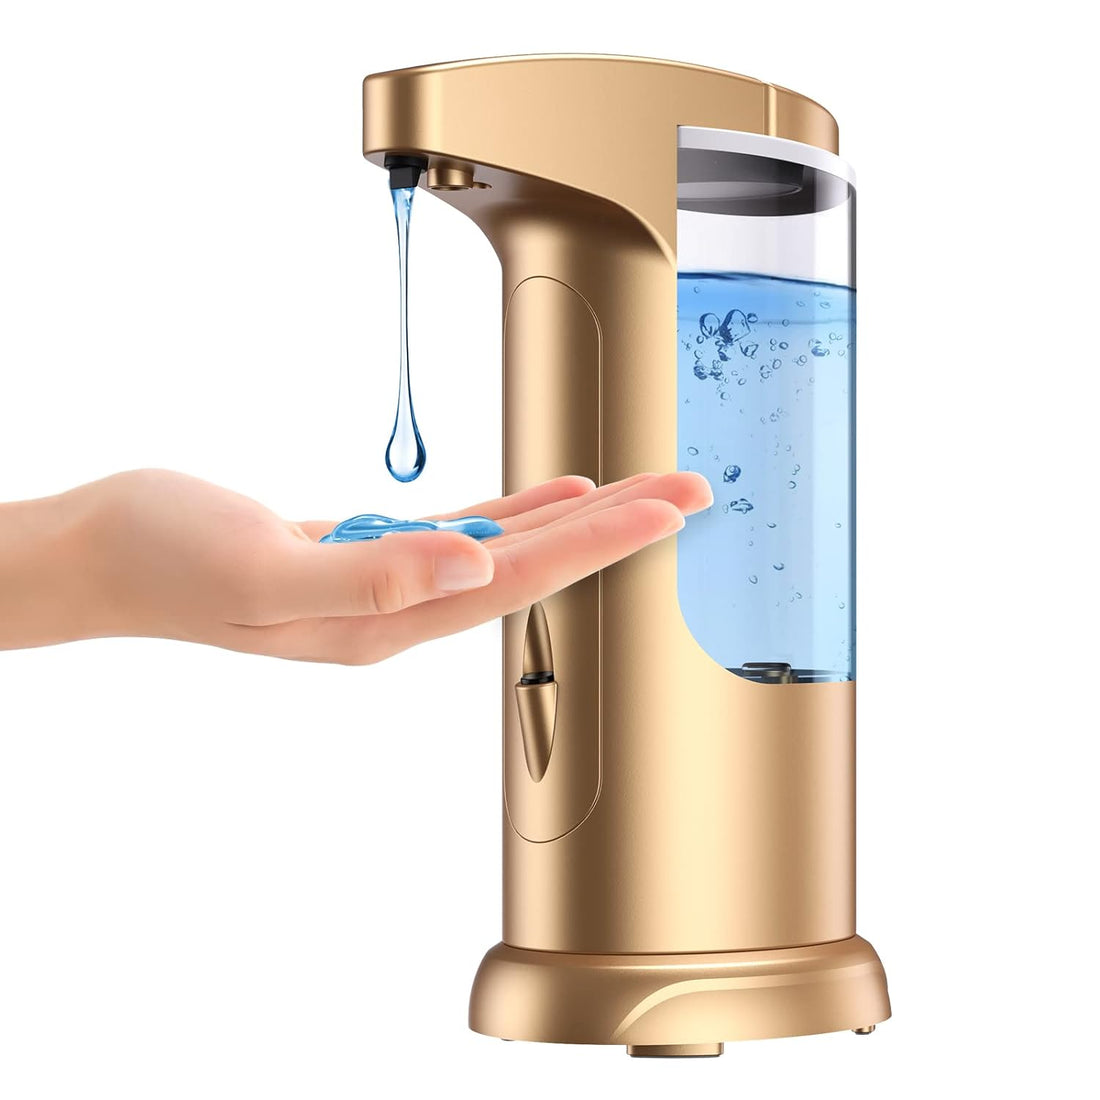 Ankilo 370ml Touch-Free Battery Operated Electric Automatic Liquid Soap Dispenser - Adjustable Soap Dispensing Volume - Premium Soap Dispenser for Kitchen Bathroom Toilet